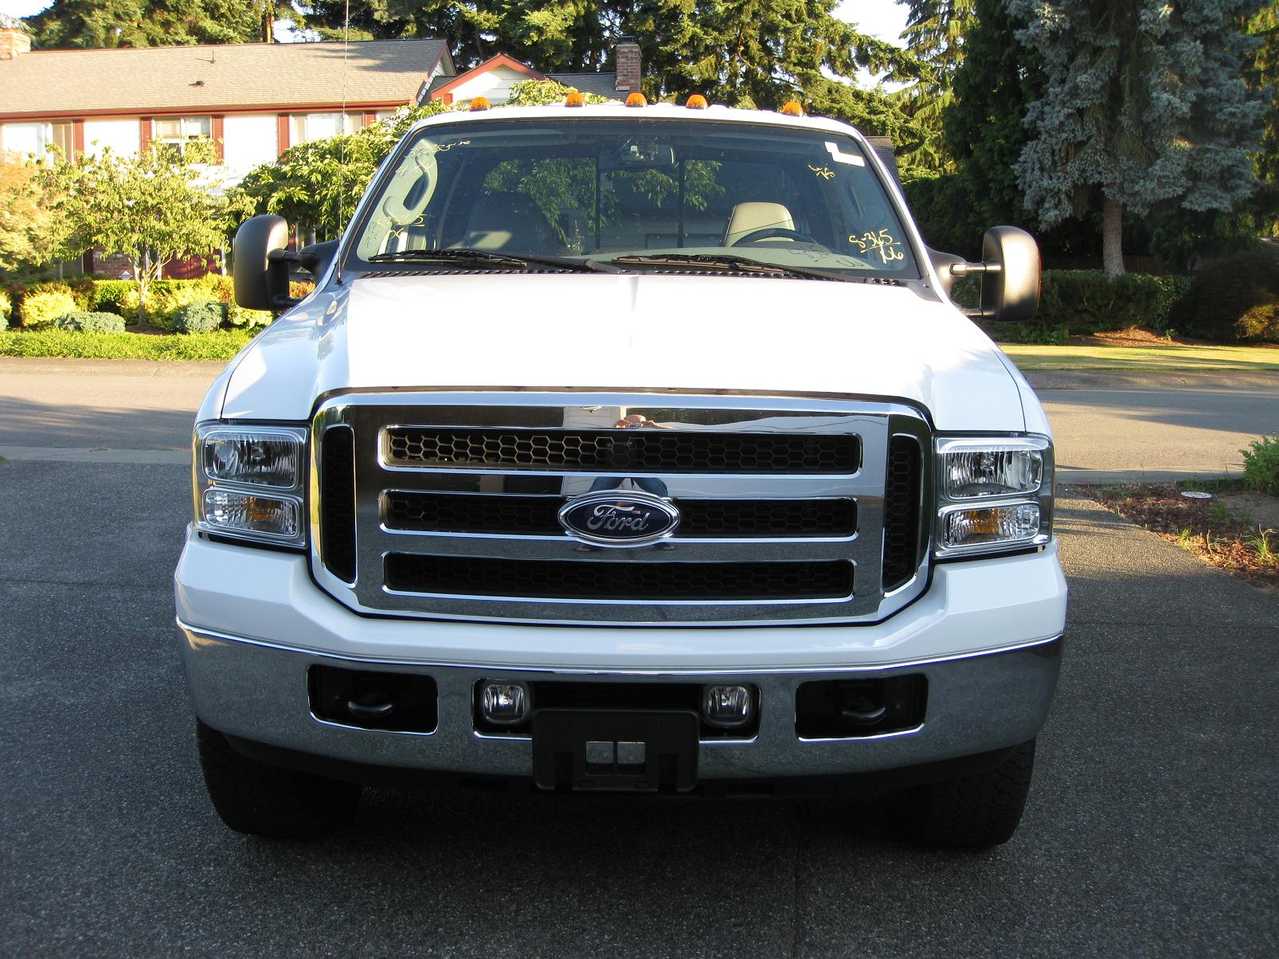 2006 FORD F250 For Sale, 6.0, Diesel, Automatic For Sale